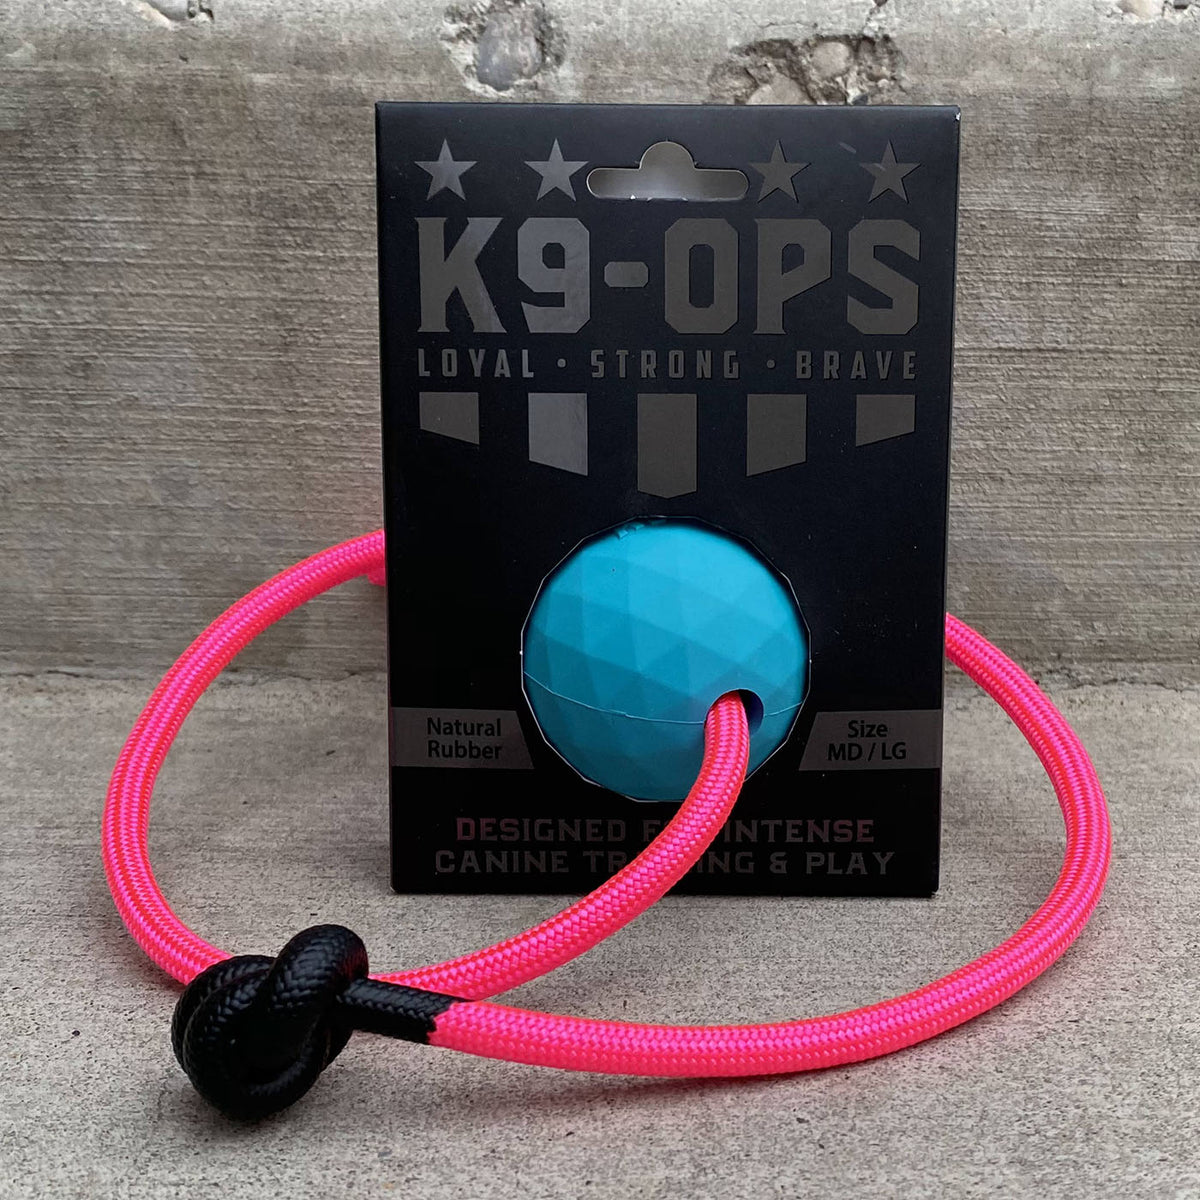 blue dog ball with a pink rope durable strong ball indestructible toy in a black k9opsbox k9ops k9-ops